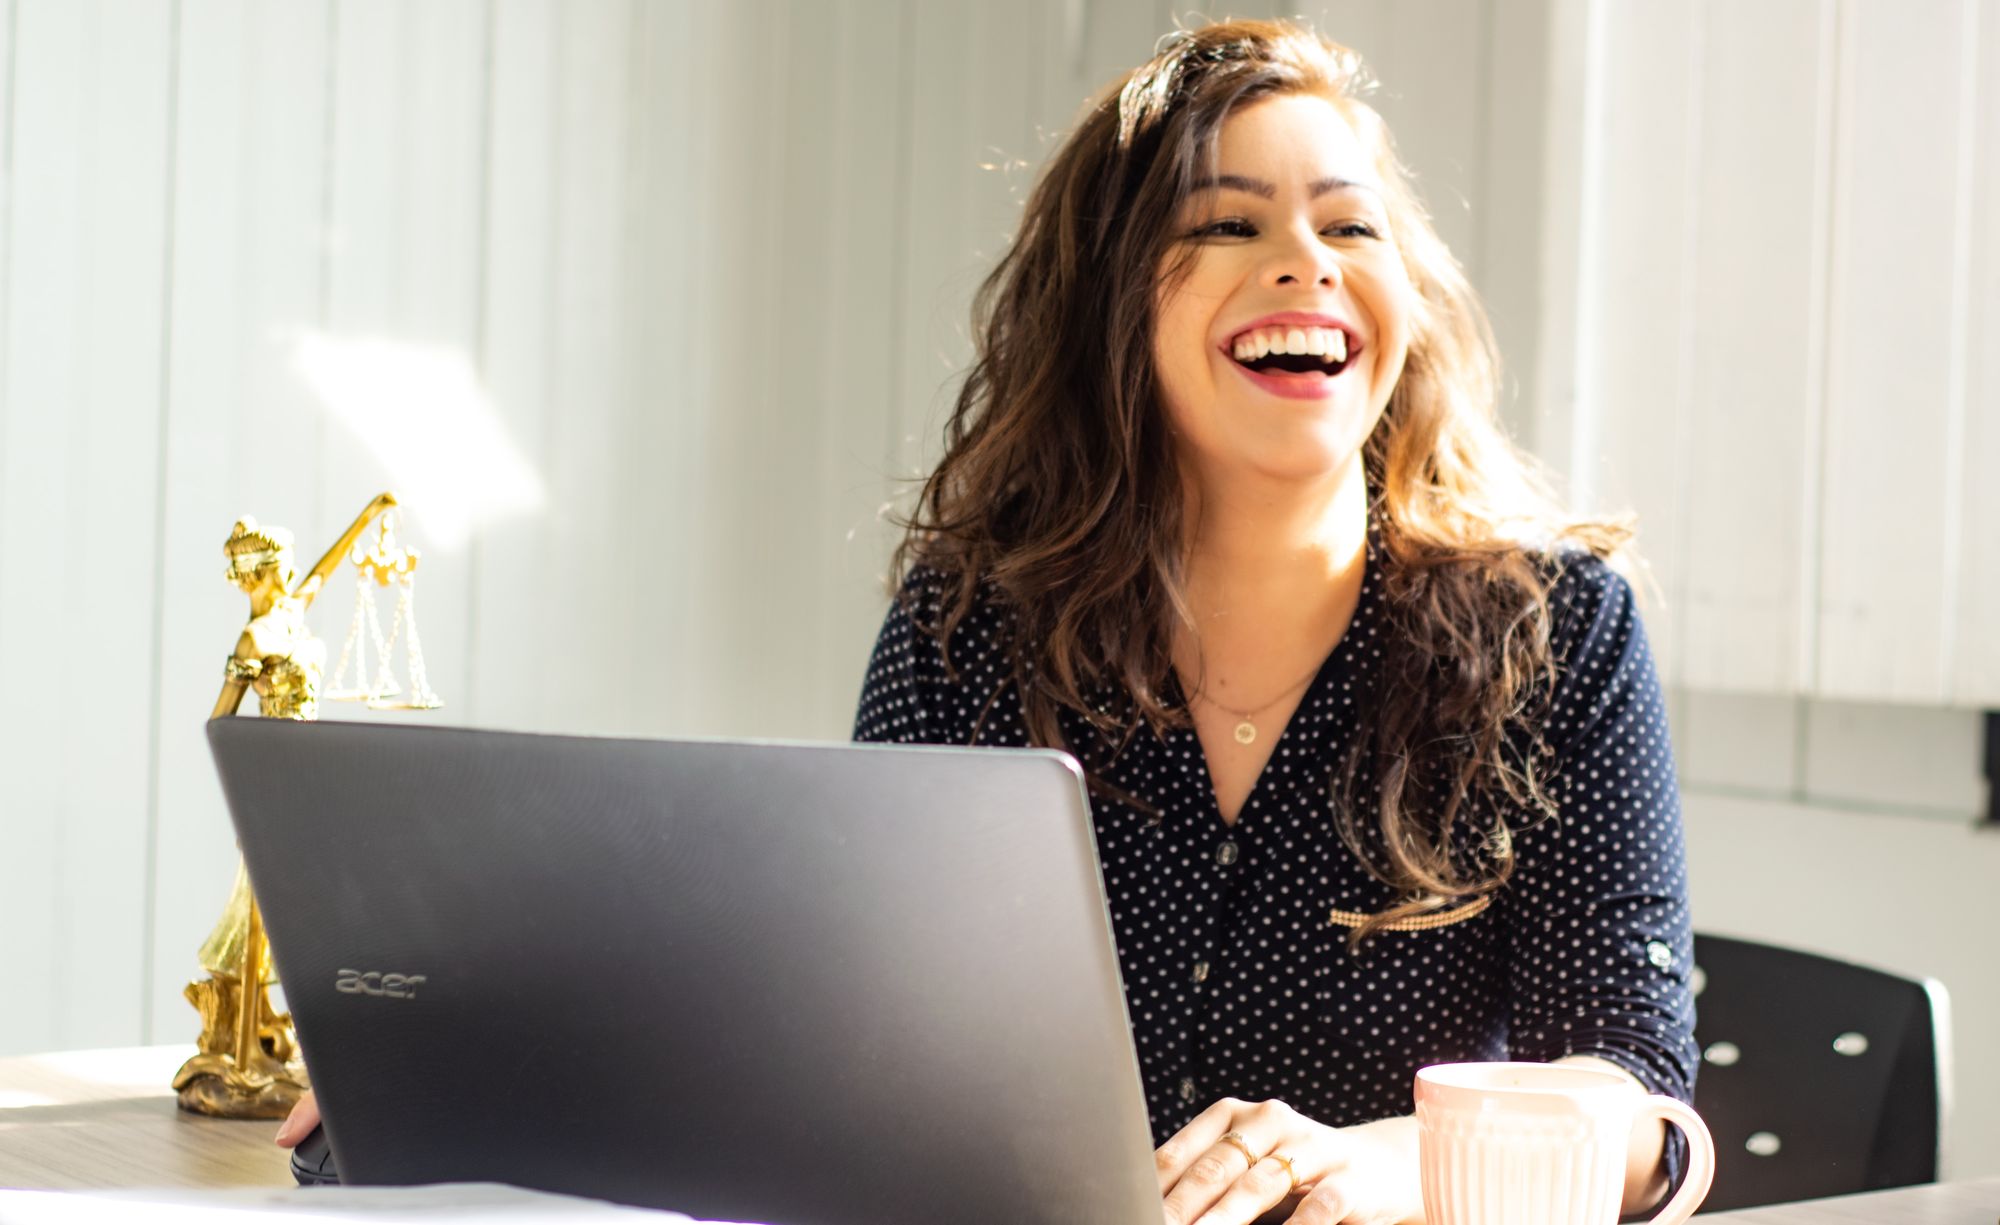 woman sat in front of laptop smiling widely.